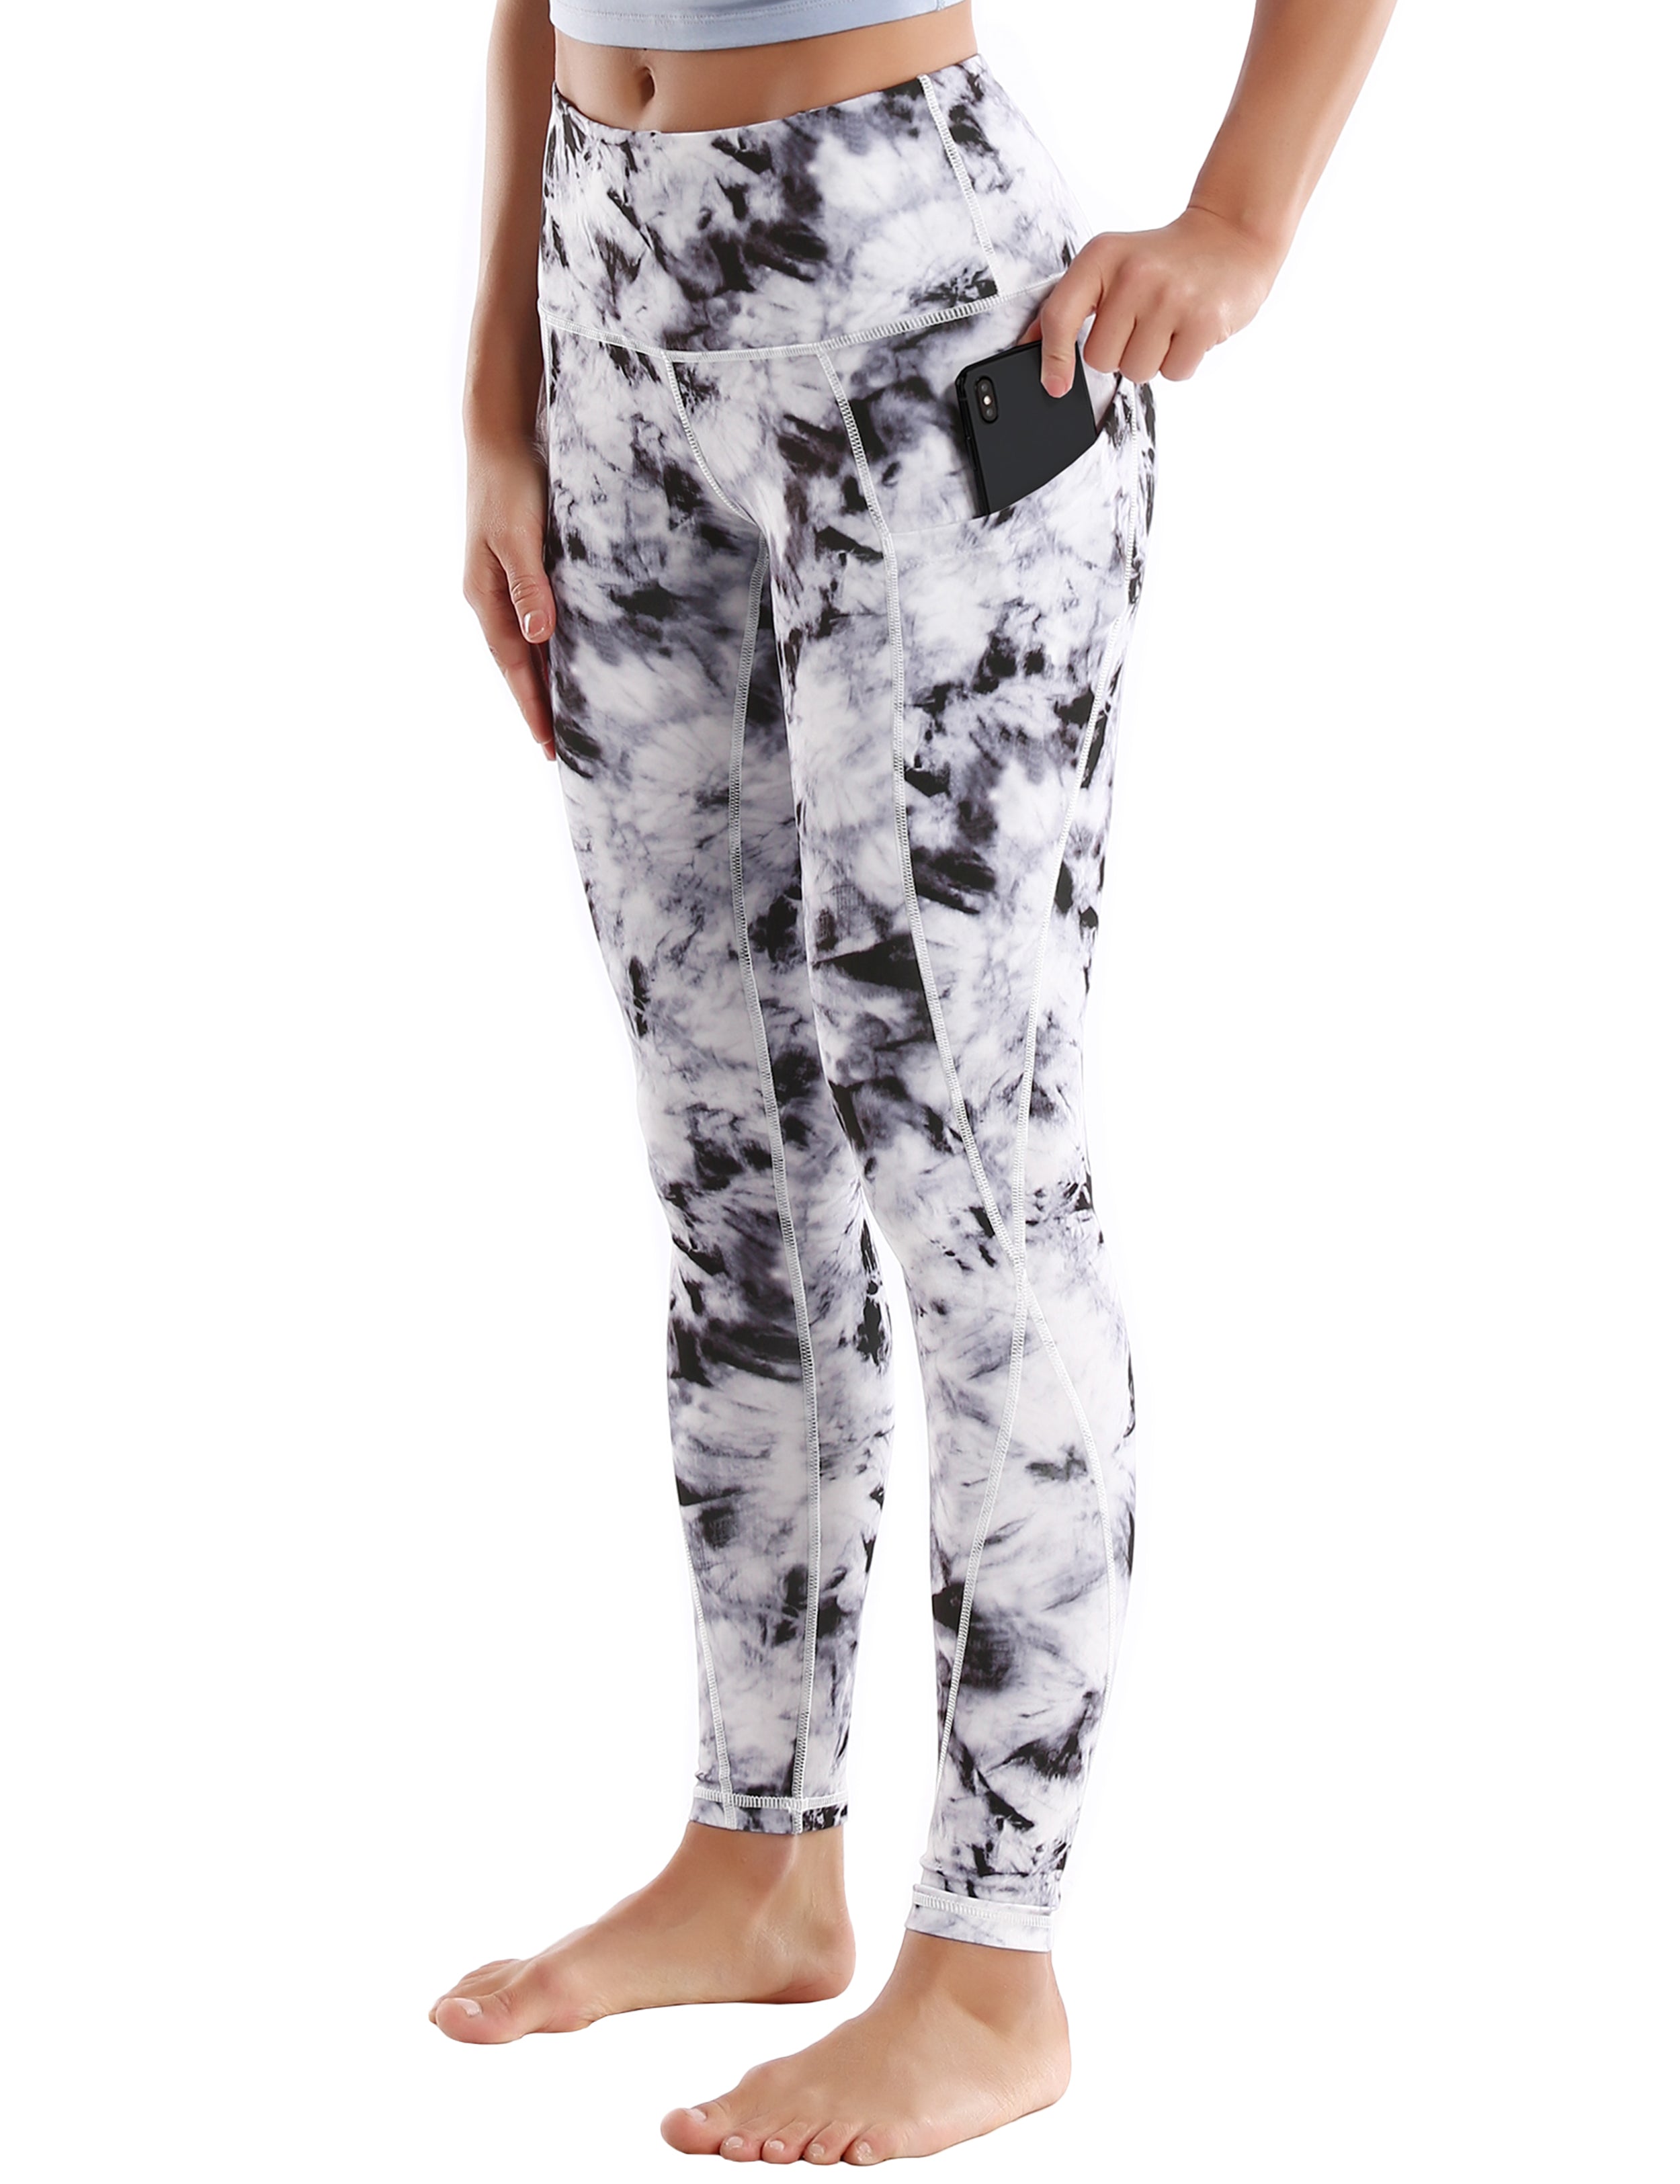 High Waist Side Pockets Running Pants blackdandelion 78%Polyester/22%Spandex Fabric doesn't attract lint easily 4-way stretch No see-through Moisture-wicking Tummy control Inner pocket